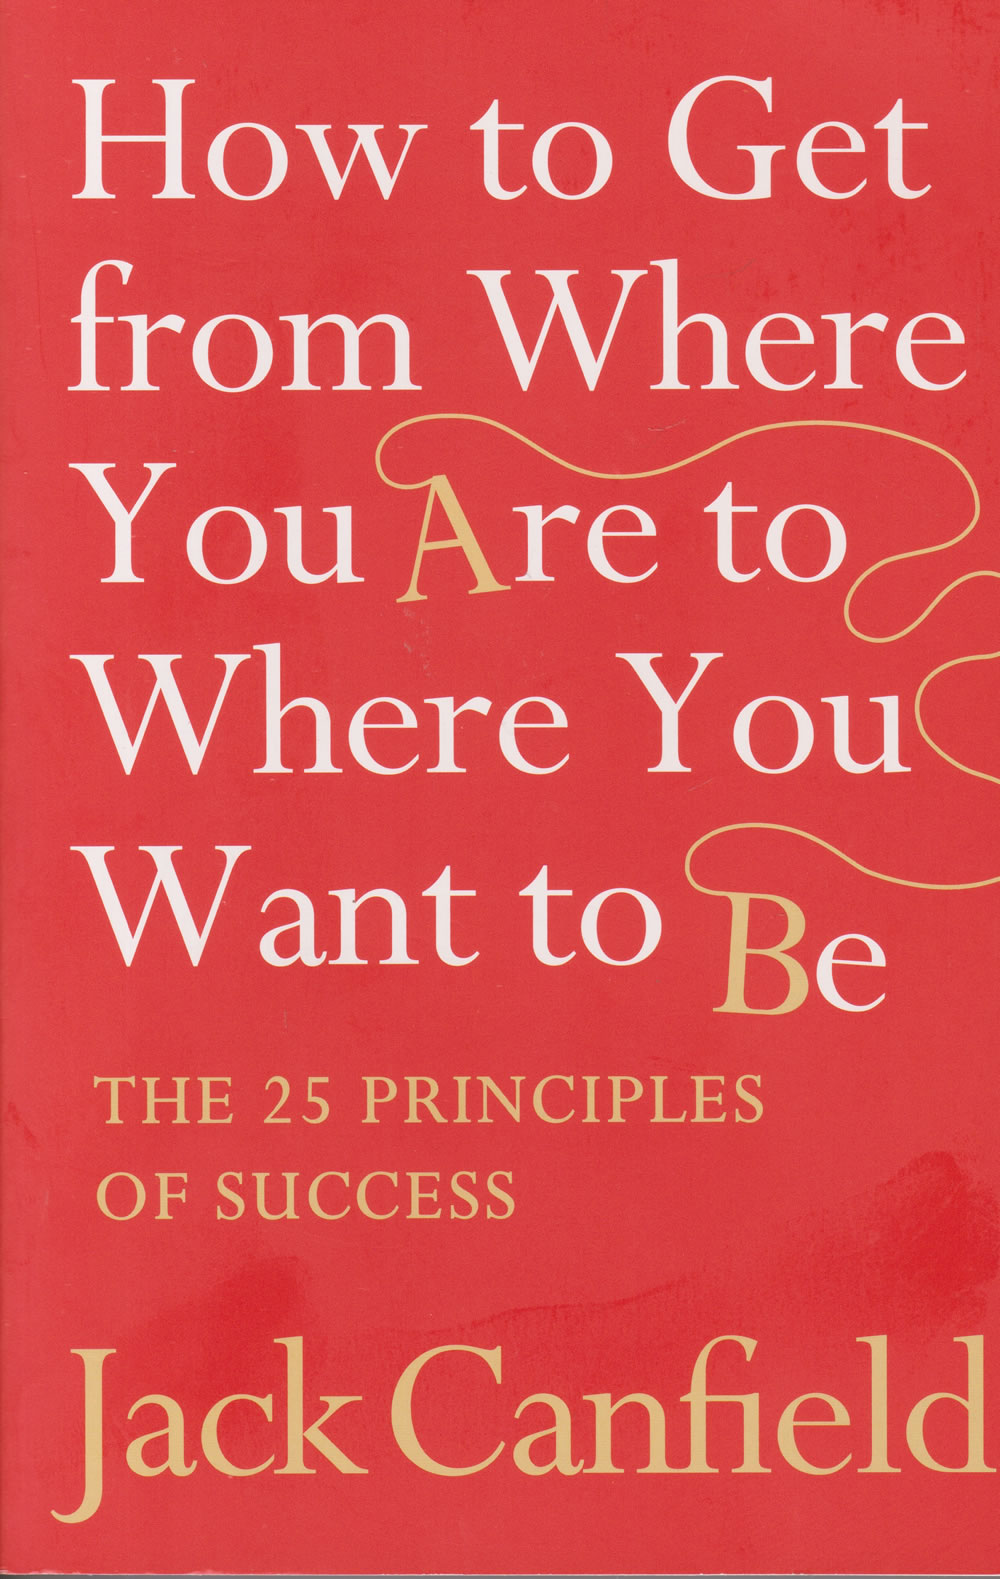 How to Get from Where You Are to Where You Want to Be: The 25 Principles of Success book by Jack Canfield